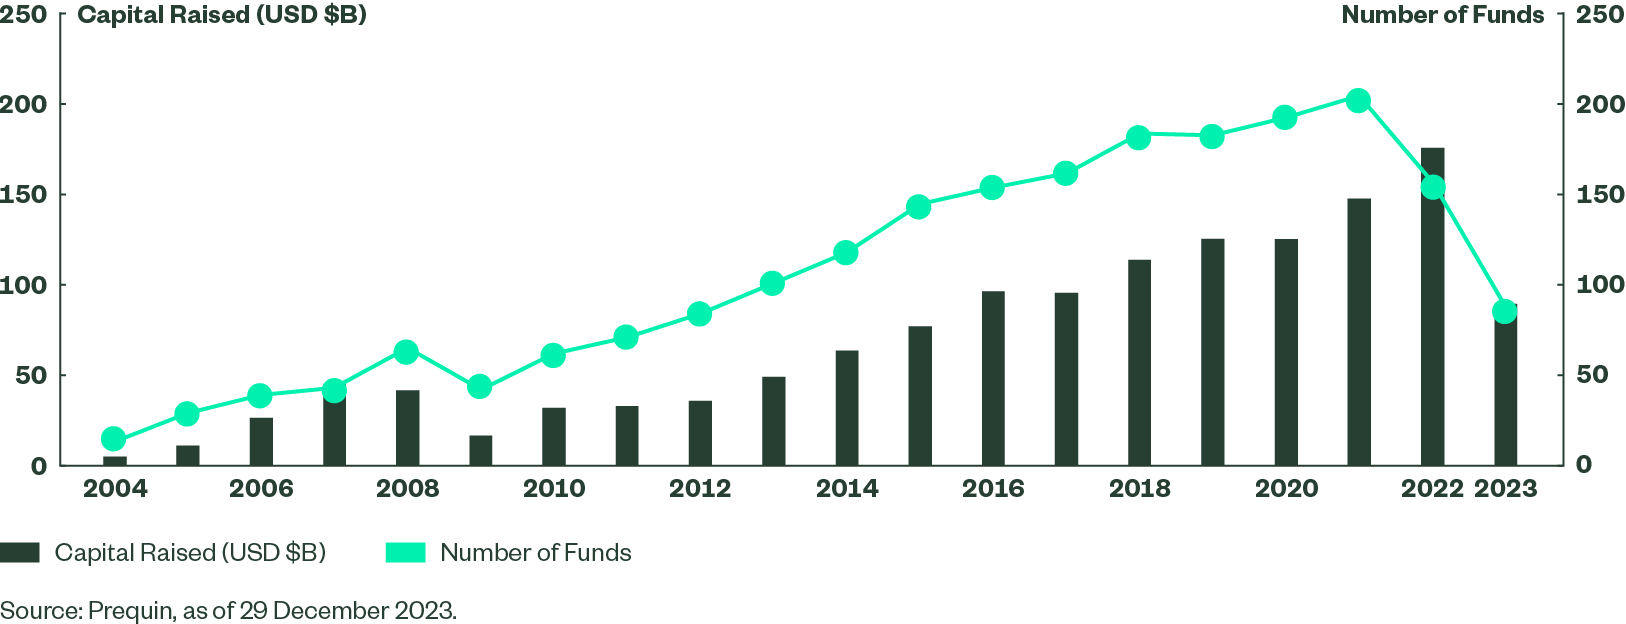 Private infrastructure capital raised and number of funds each year from 2004 to 2023.